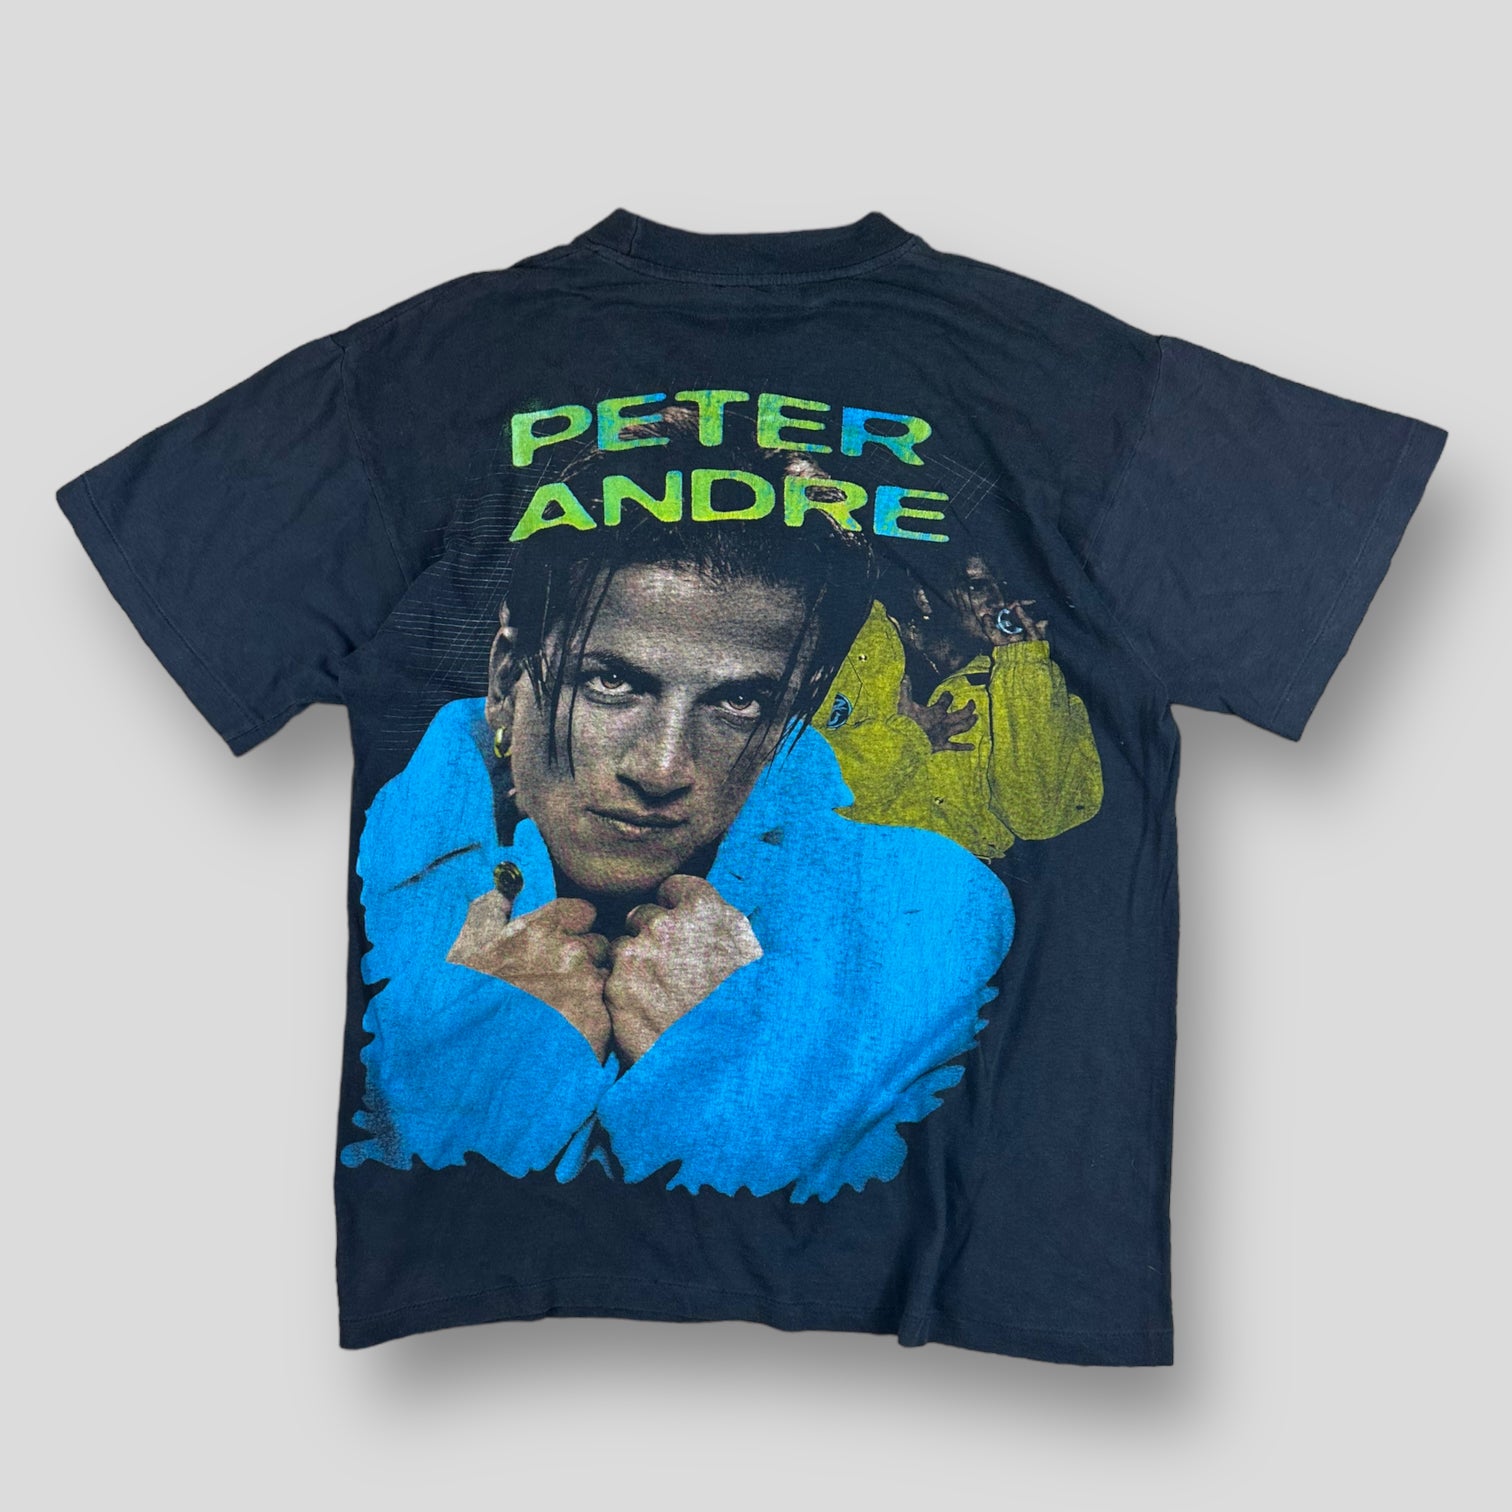 Vintage Peter Andre graphic T-shirt